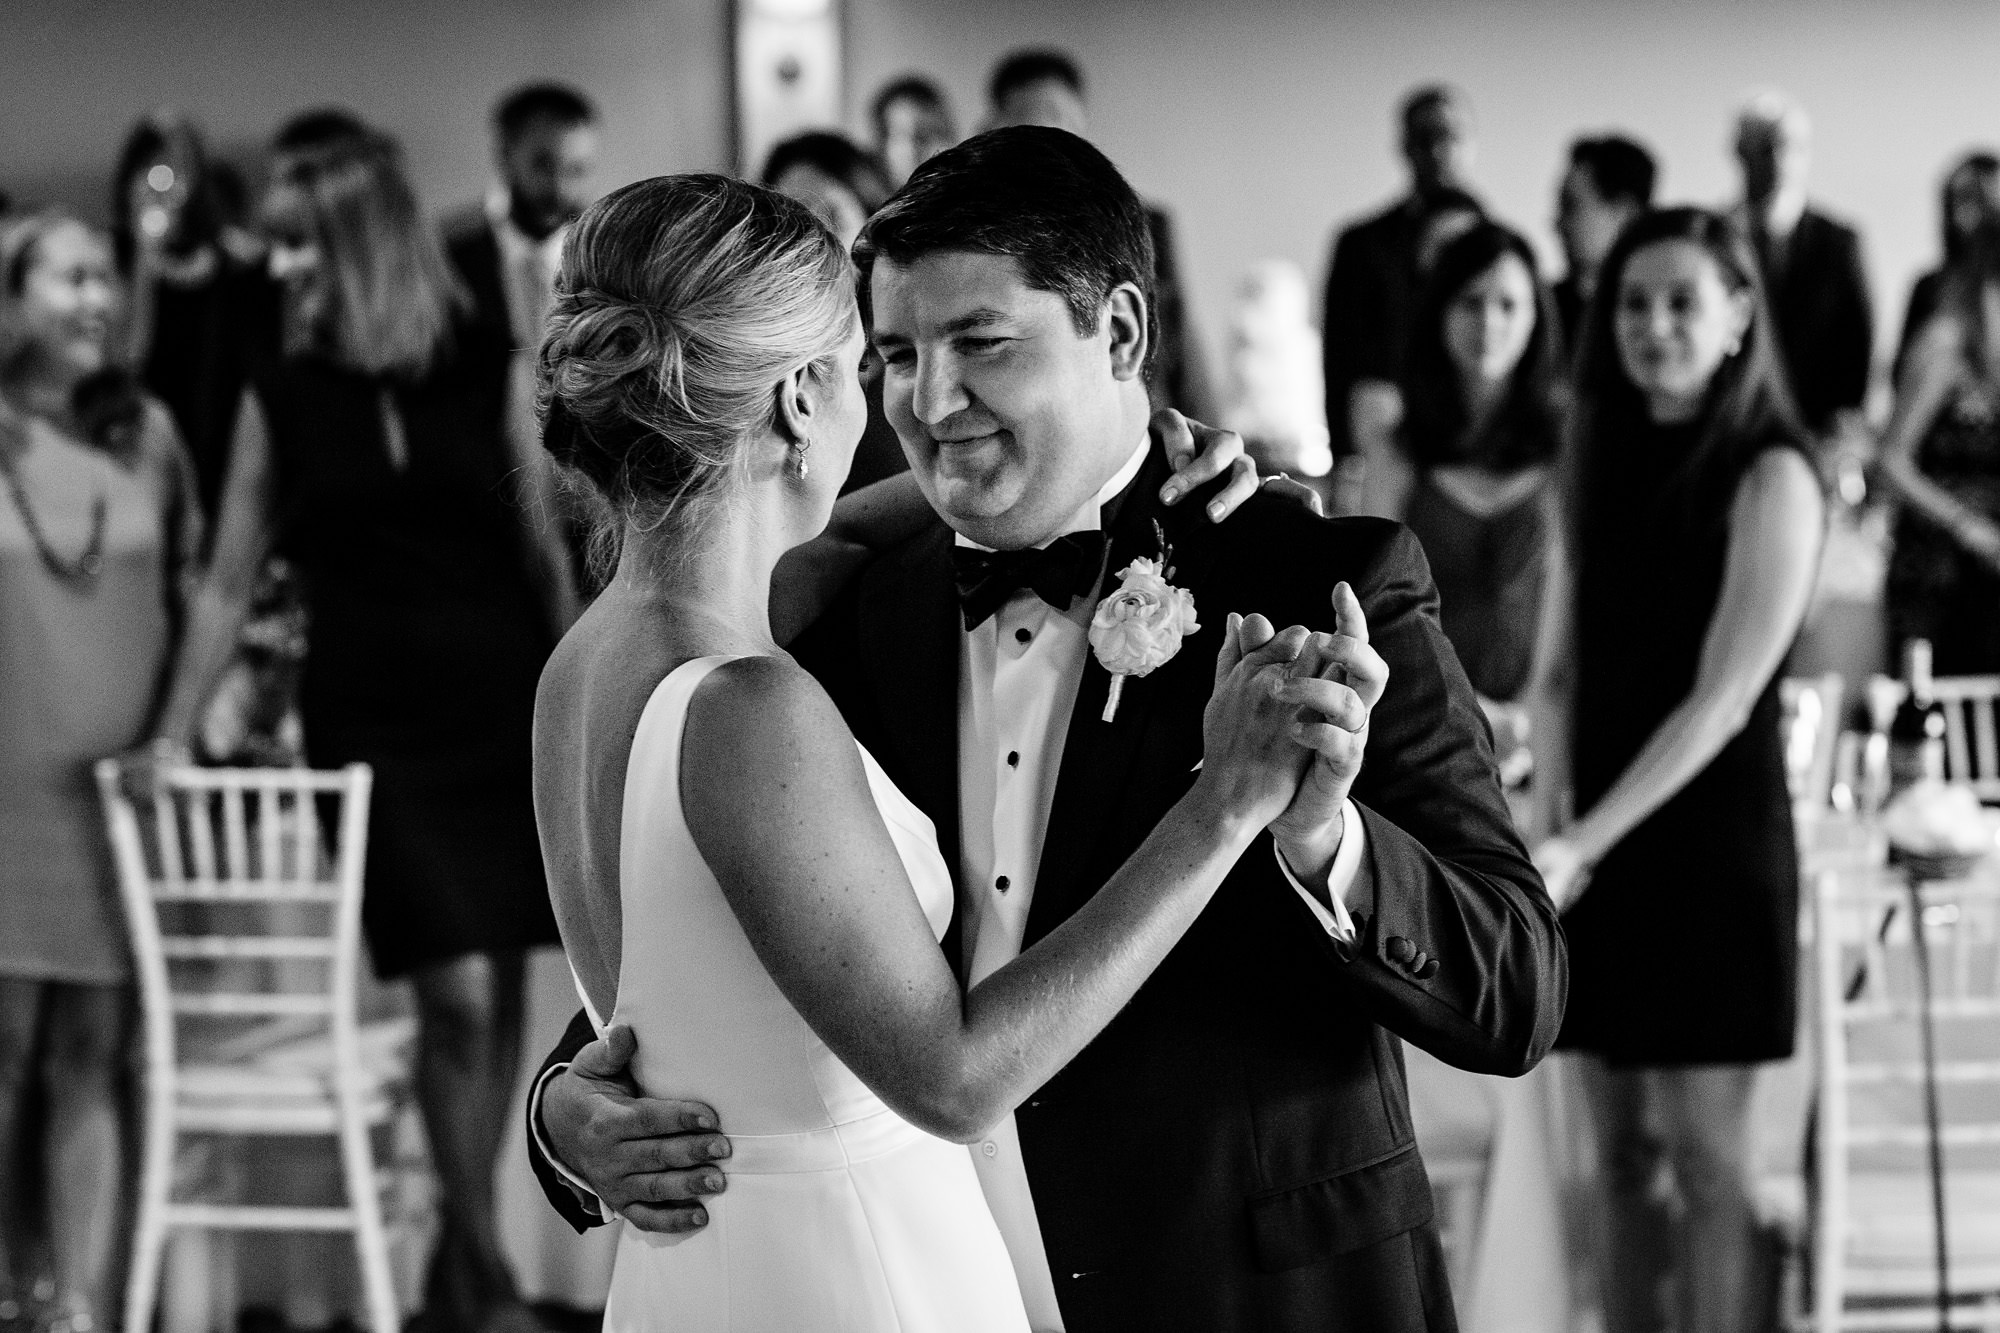 The bride and groom share a first dance at the Newagen Seaside Inn in Southport, Maine